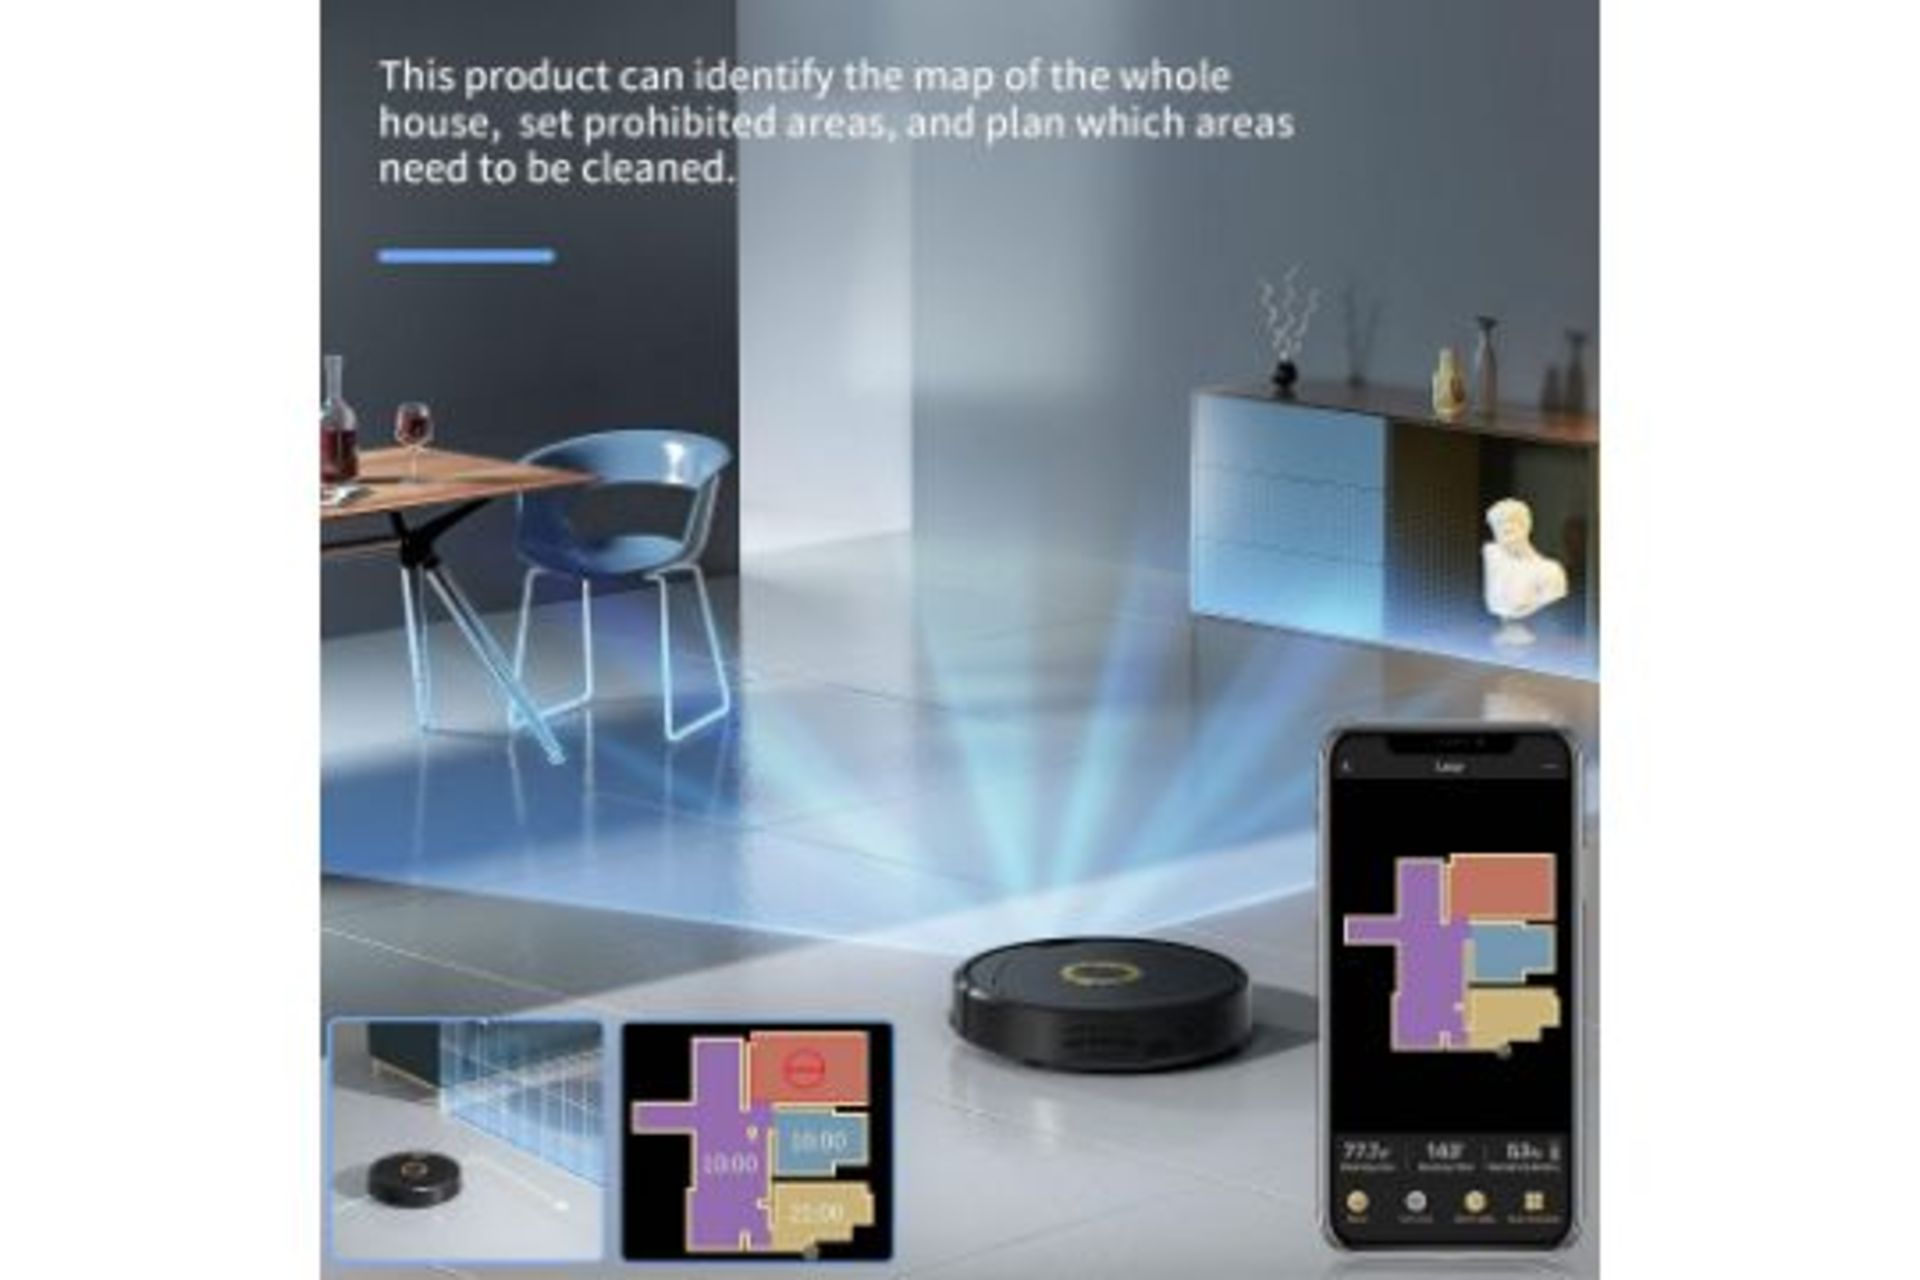 New & Boxed Robot Vacuum Cleaner Lucy with 3D-SLAM Navigation. RRP £369.99. 4000Pa Suction, No- - Image 5 of 7